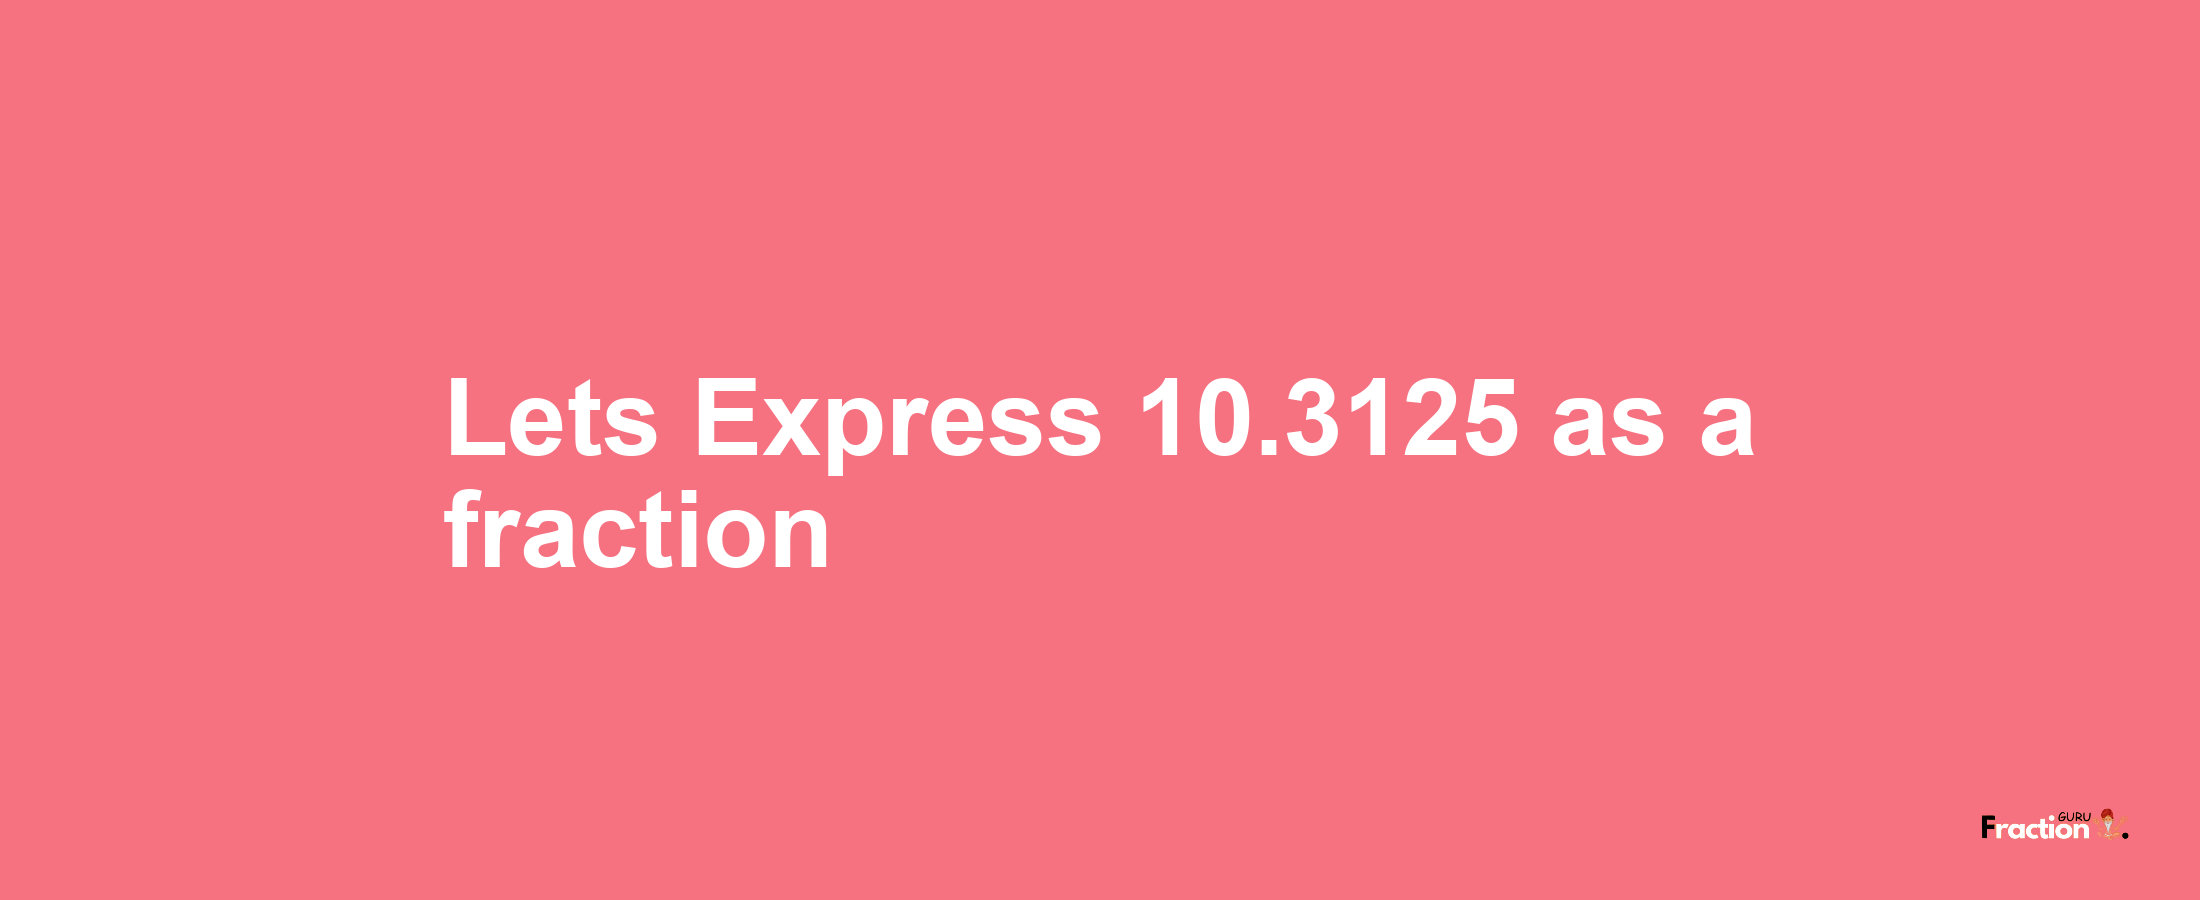 Lets Express 10.3125 as afraction